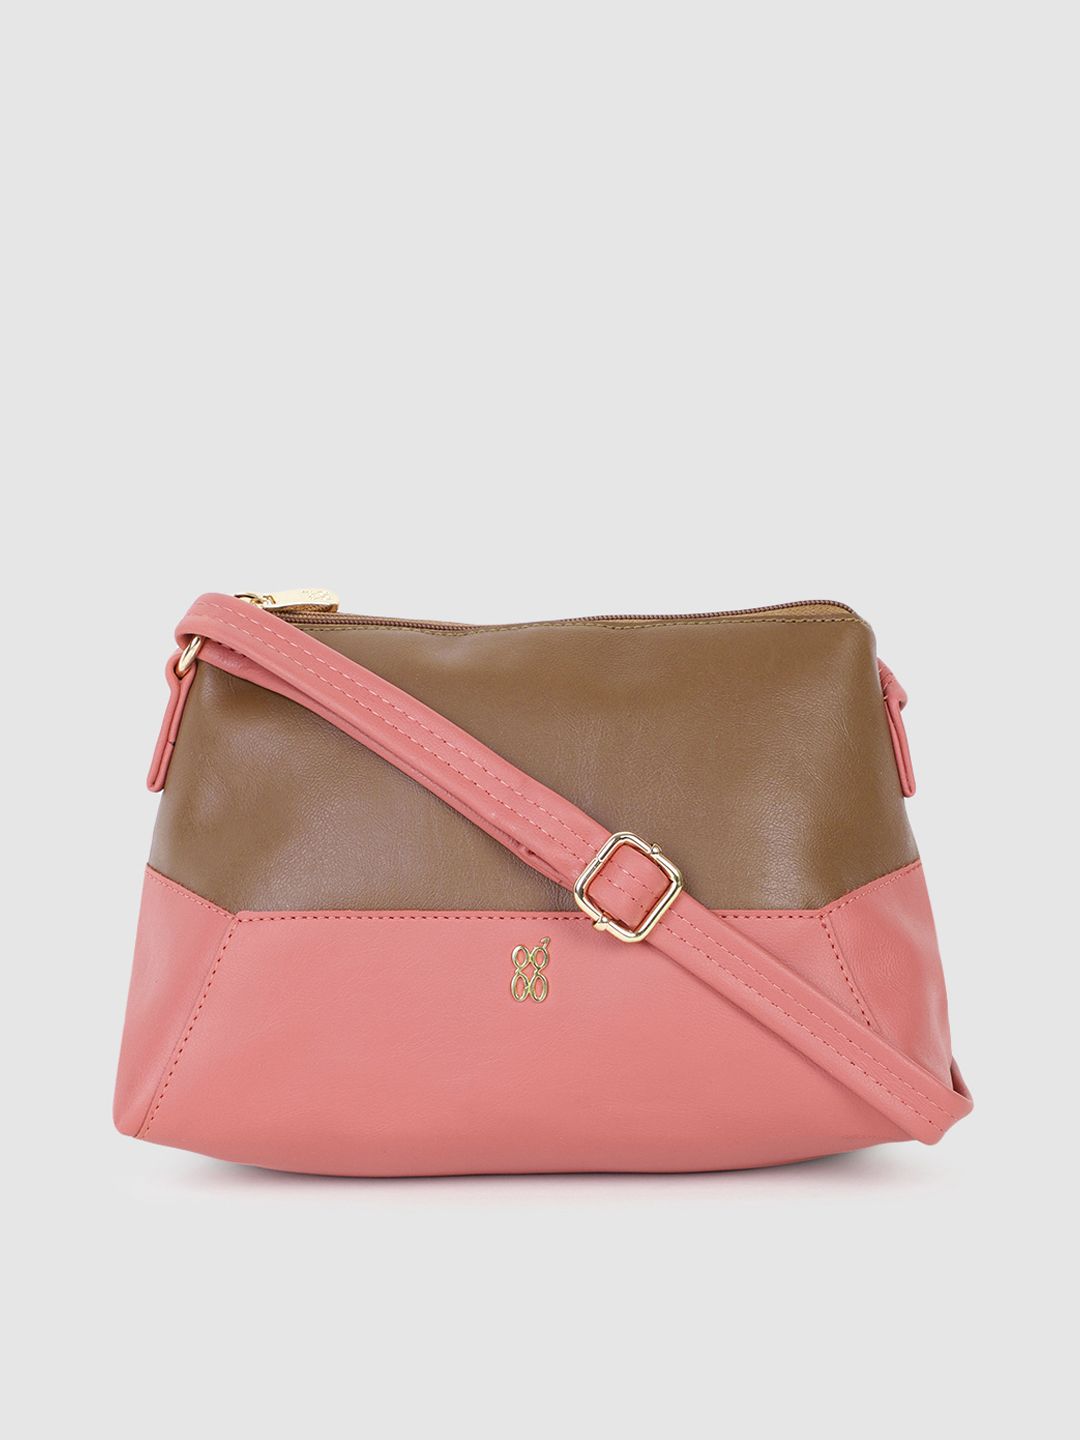 Baggit Pink & Brown Colourblocked LXE ISABELLA E DIEGO Sling Bag Price in India